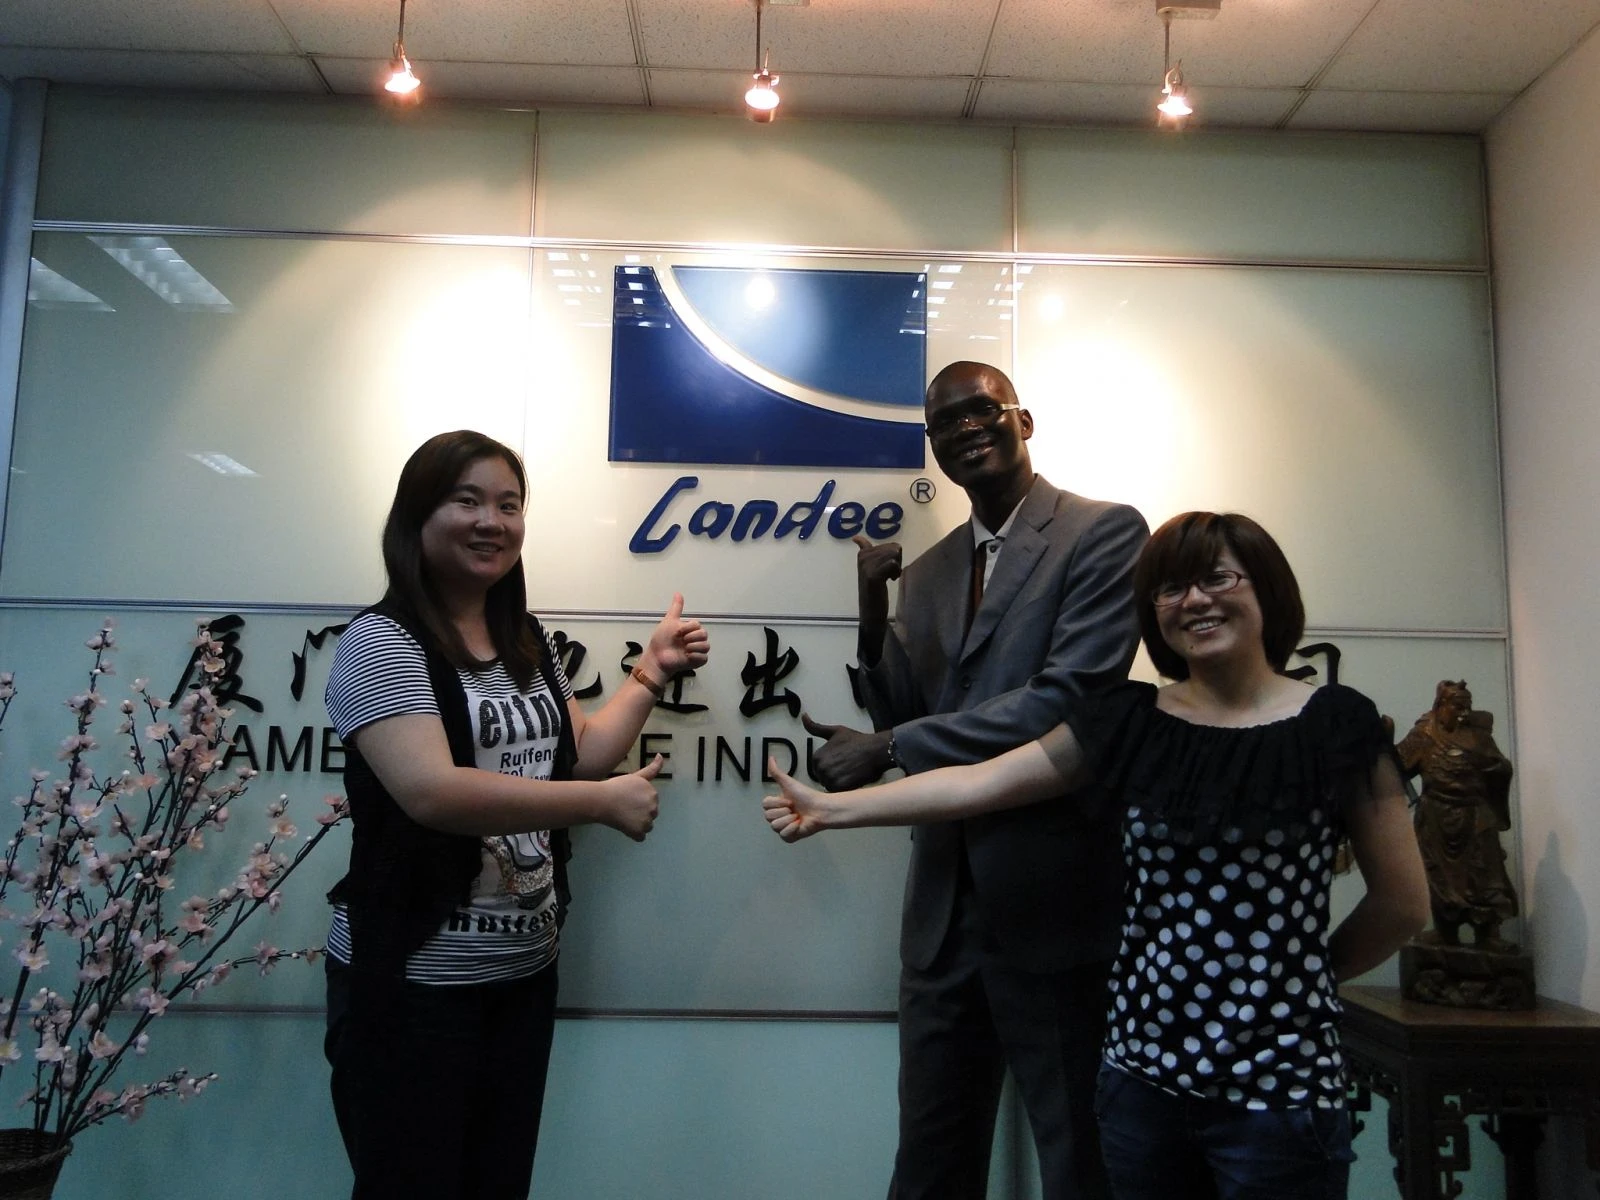 Burkina Faso Client Visits Landee Intl Trade Cneter for Valves, Pipes, Flanges, Pipe Fittings, etc.